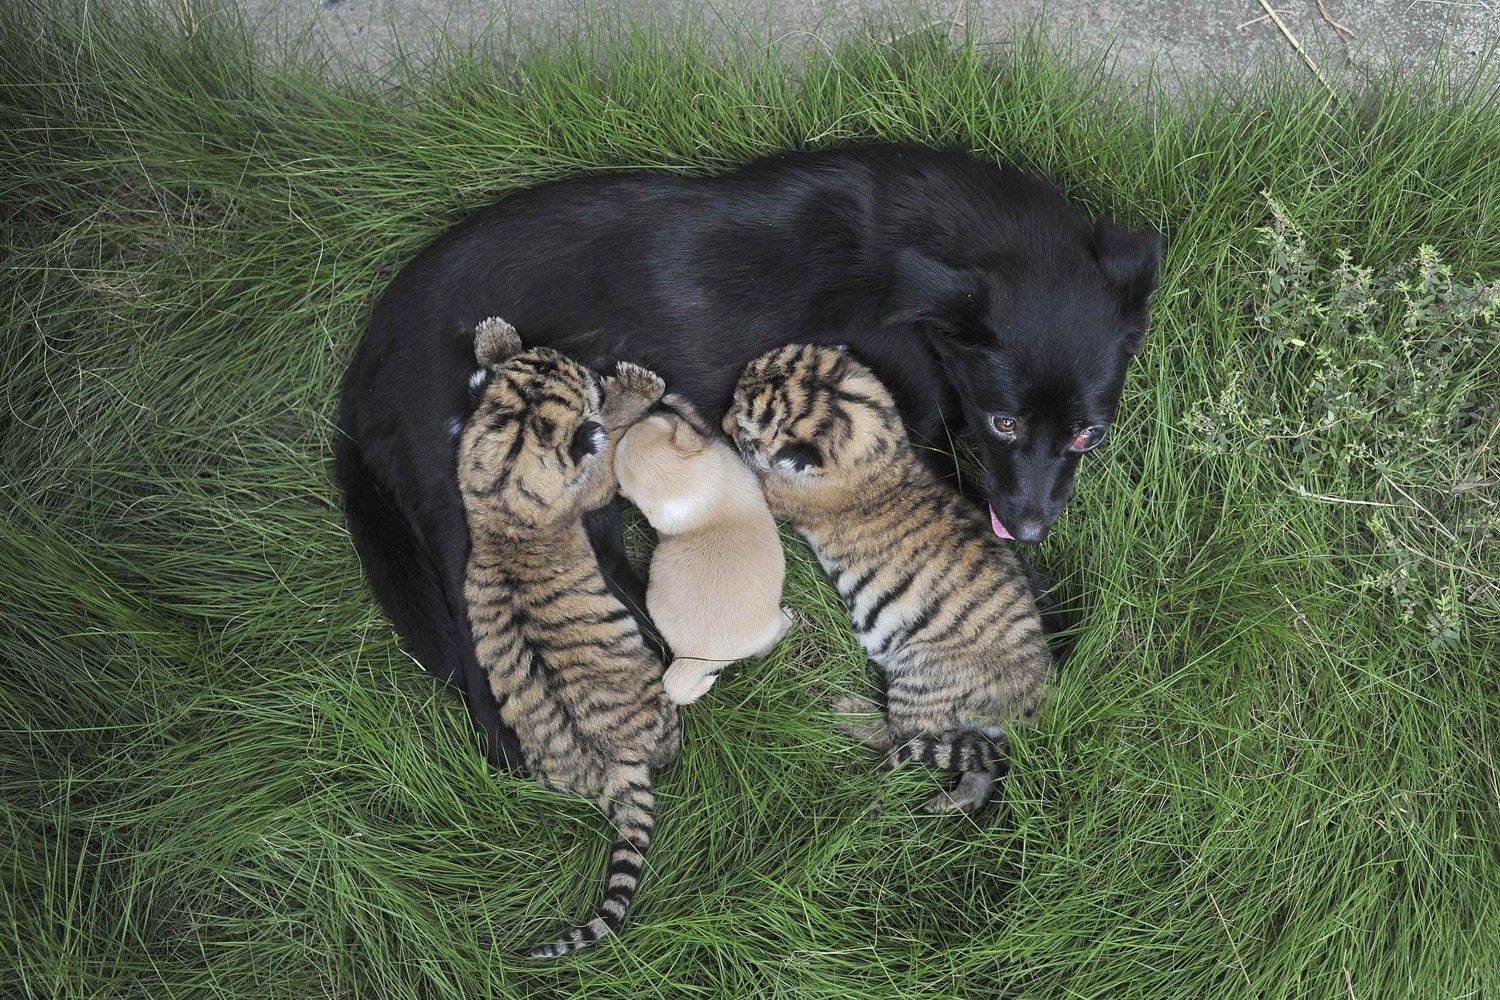 A femal dog feeds two-day-old tiger cubs and her puppy at a zoo in Hefei